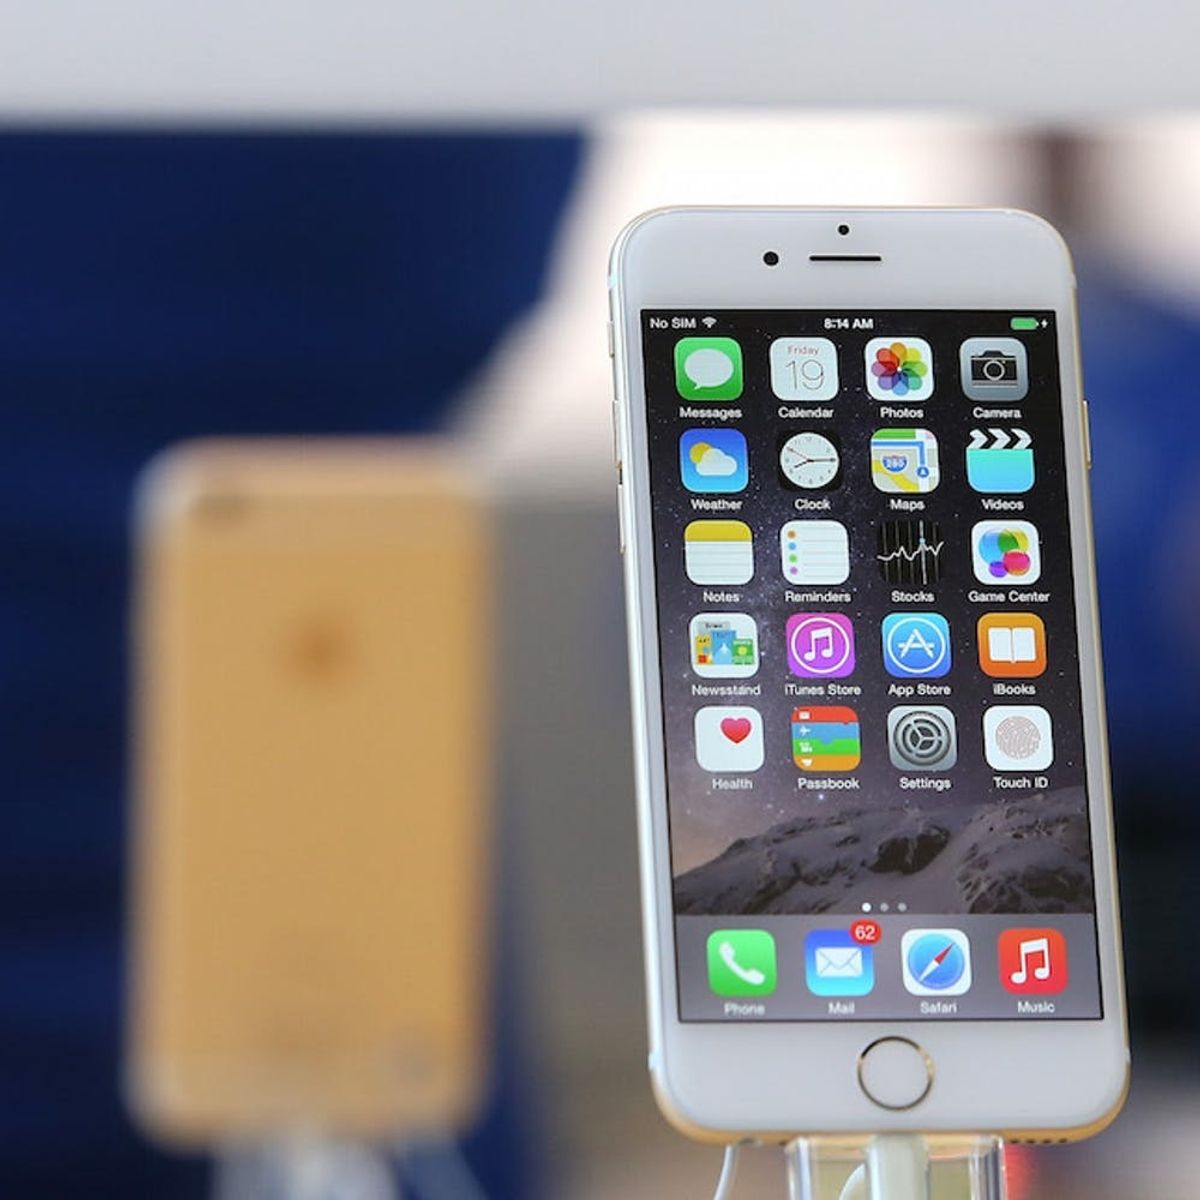 The Latest Rumors About the iPhone 6S Do NOT Sound Good